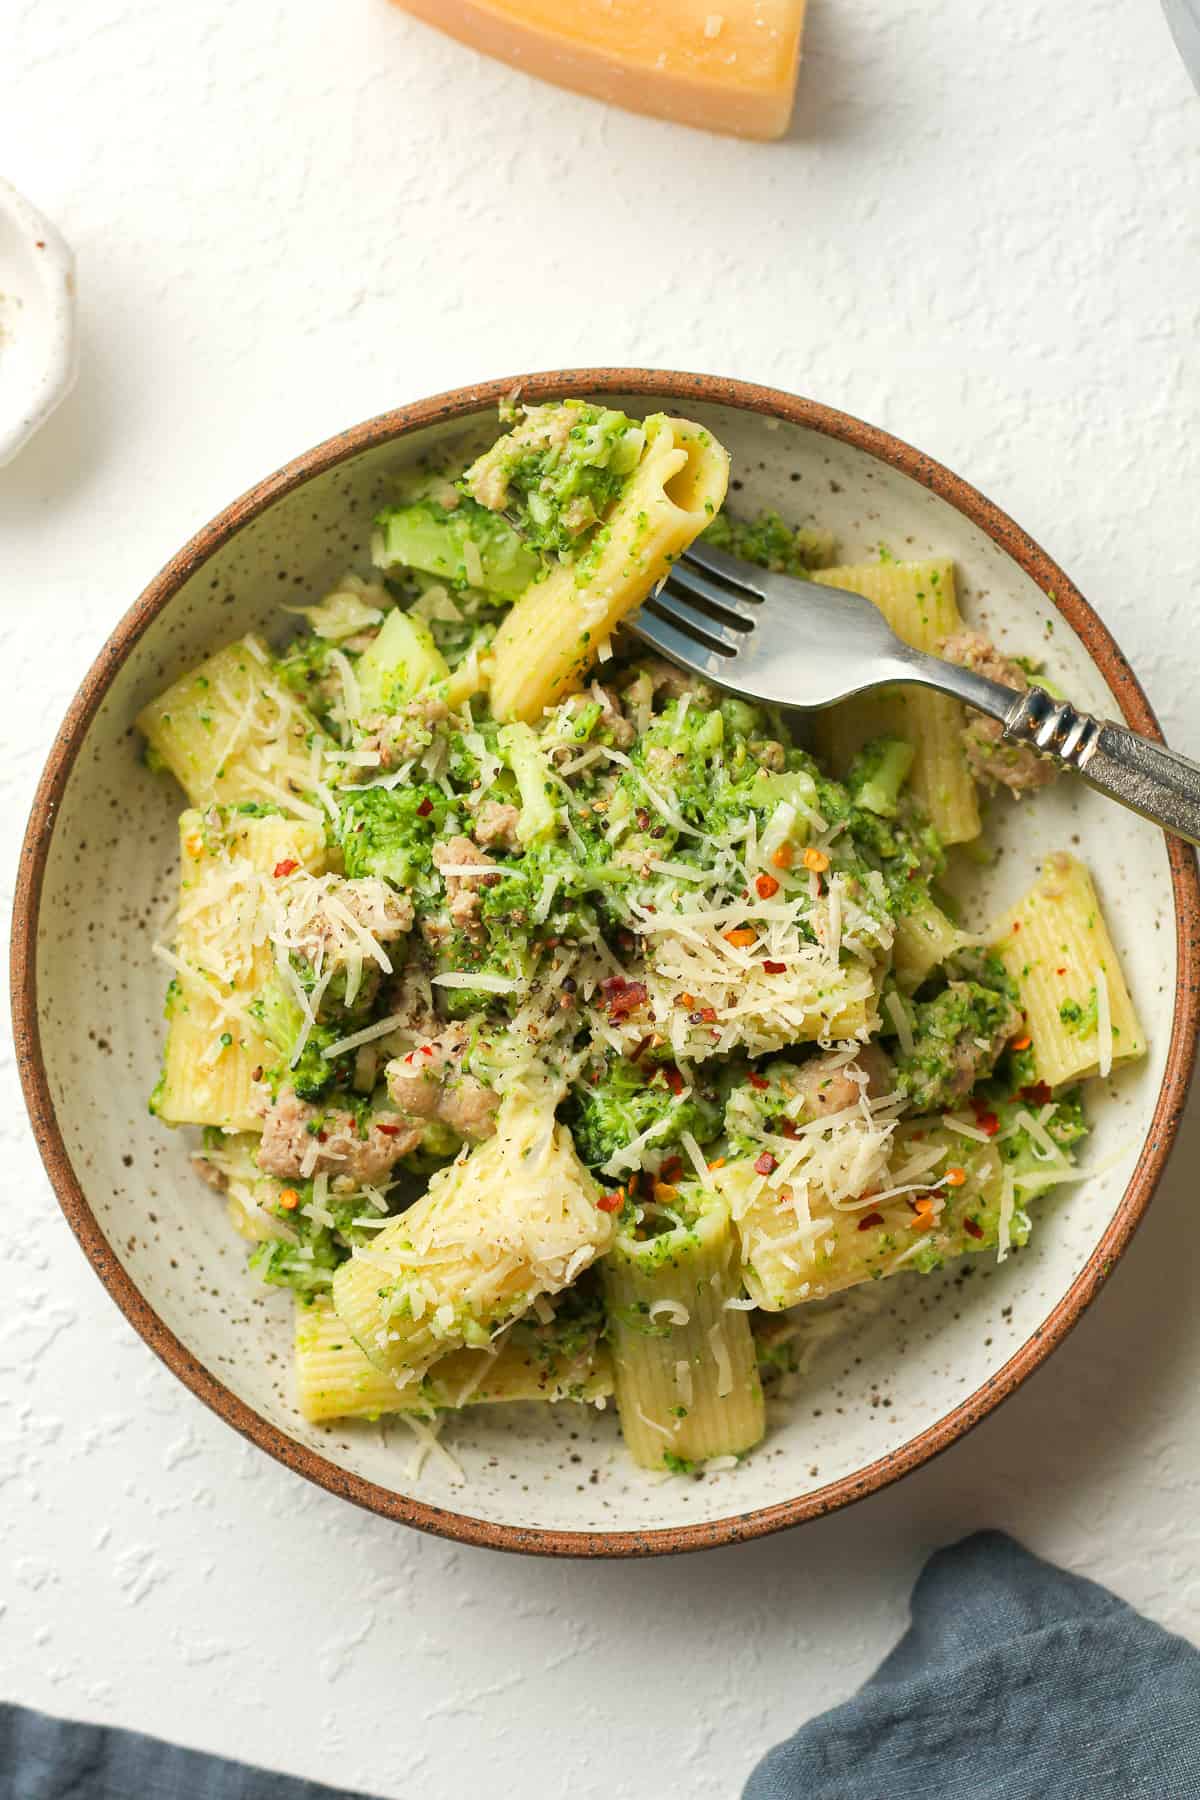 A serving of the pasta with broccoli.